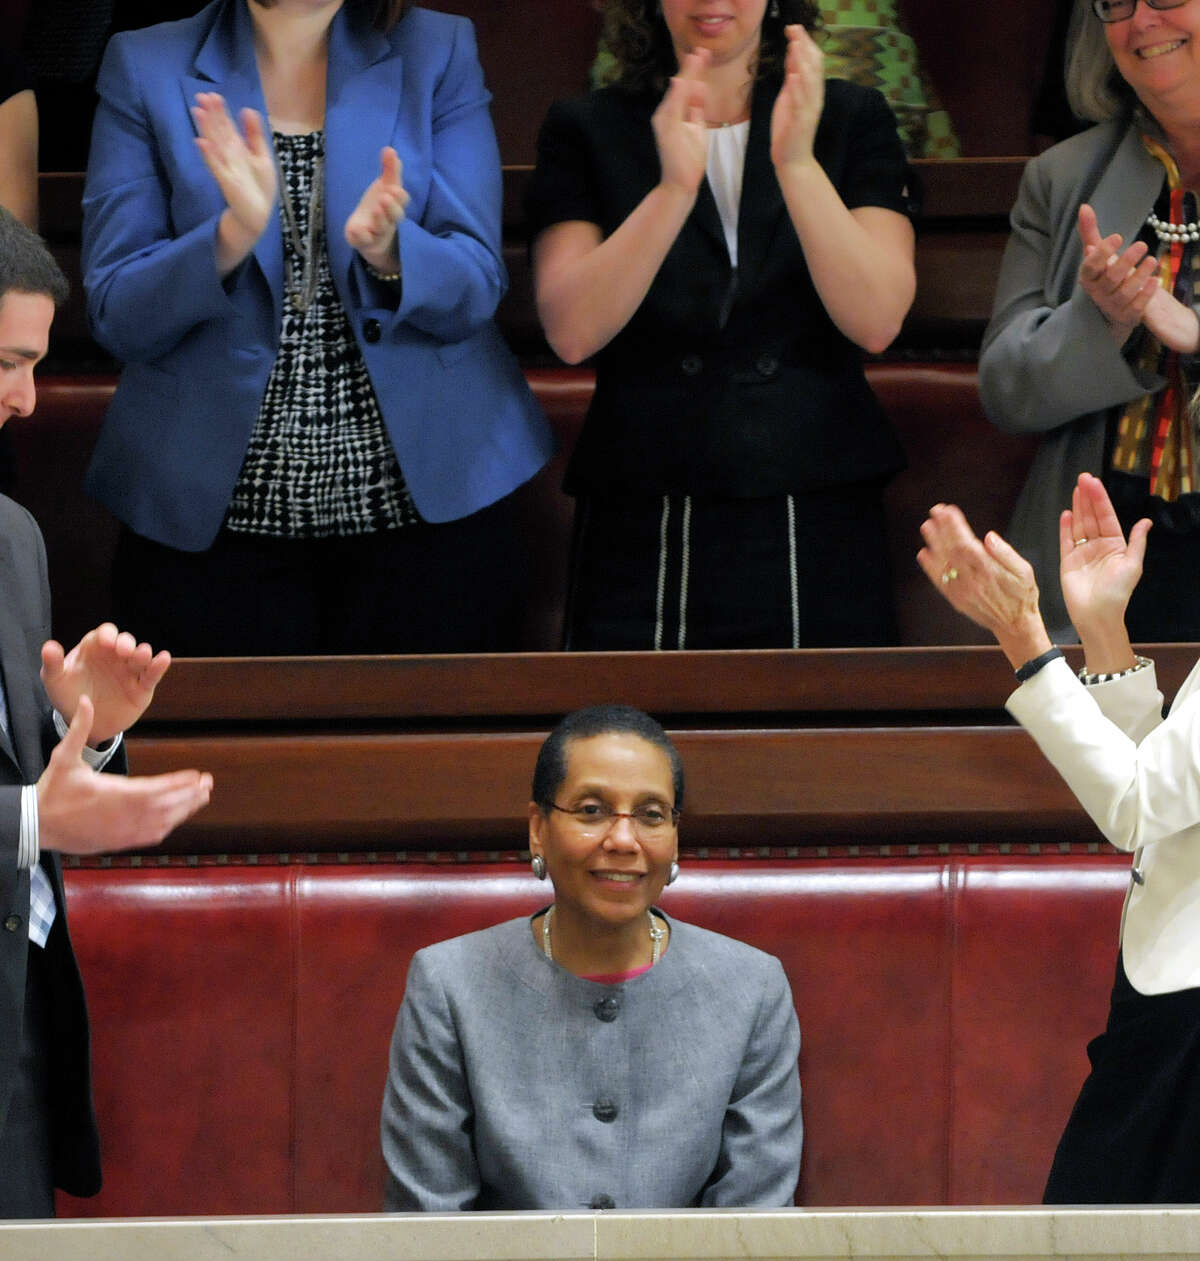 Justice Sheila Abdus-Salaam receives applause from people in the gallery after being confirmed by the State Senate at the Capitol on Monday, May 6, 2013 in Albany, NY. Justice Sheila Abdus-Salaam is the first African-American woman on the seven-member Court of Appeals. (Paul Buckowski / Times Union)